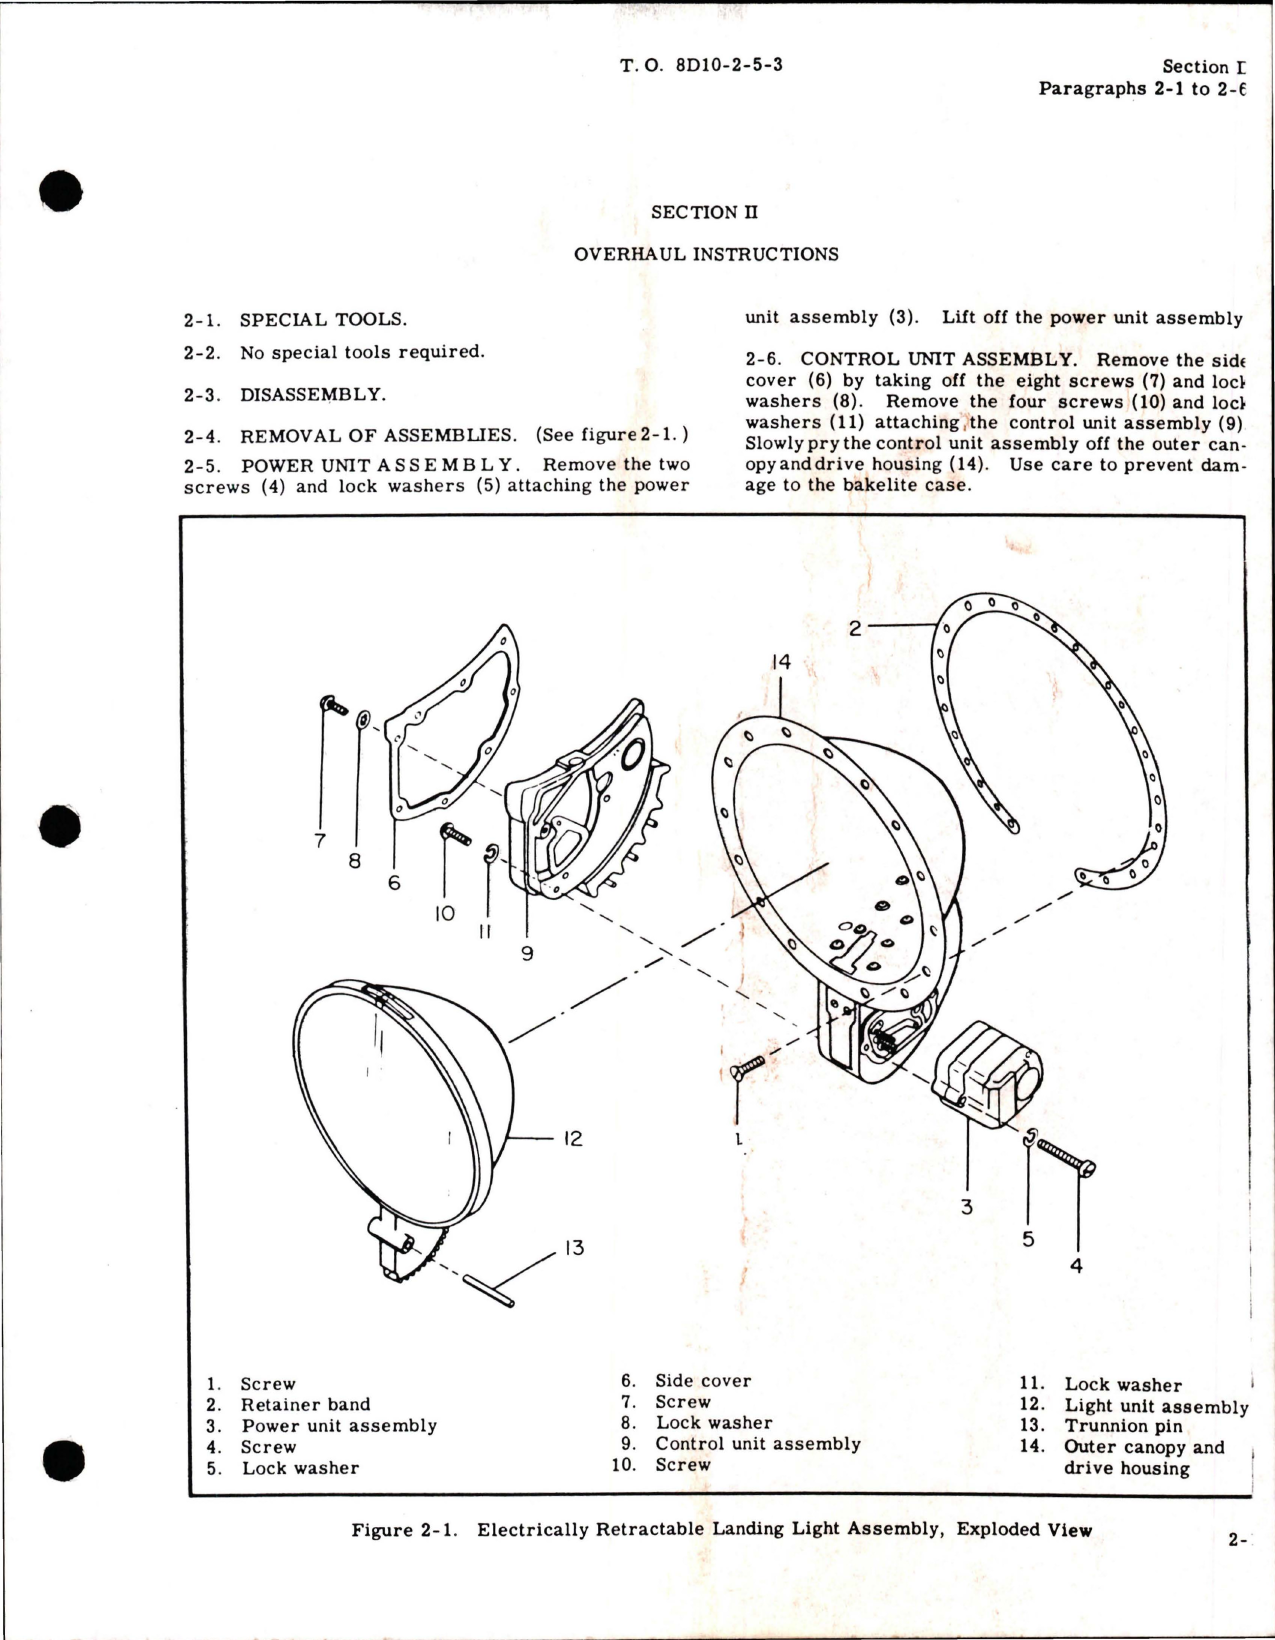 Sample page 7 from AirCorps Library document: Overhaul for Electrically Retractable Landing Light Assemblies - Part G-3800A Series - Change 2